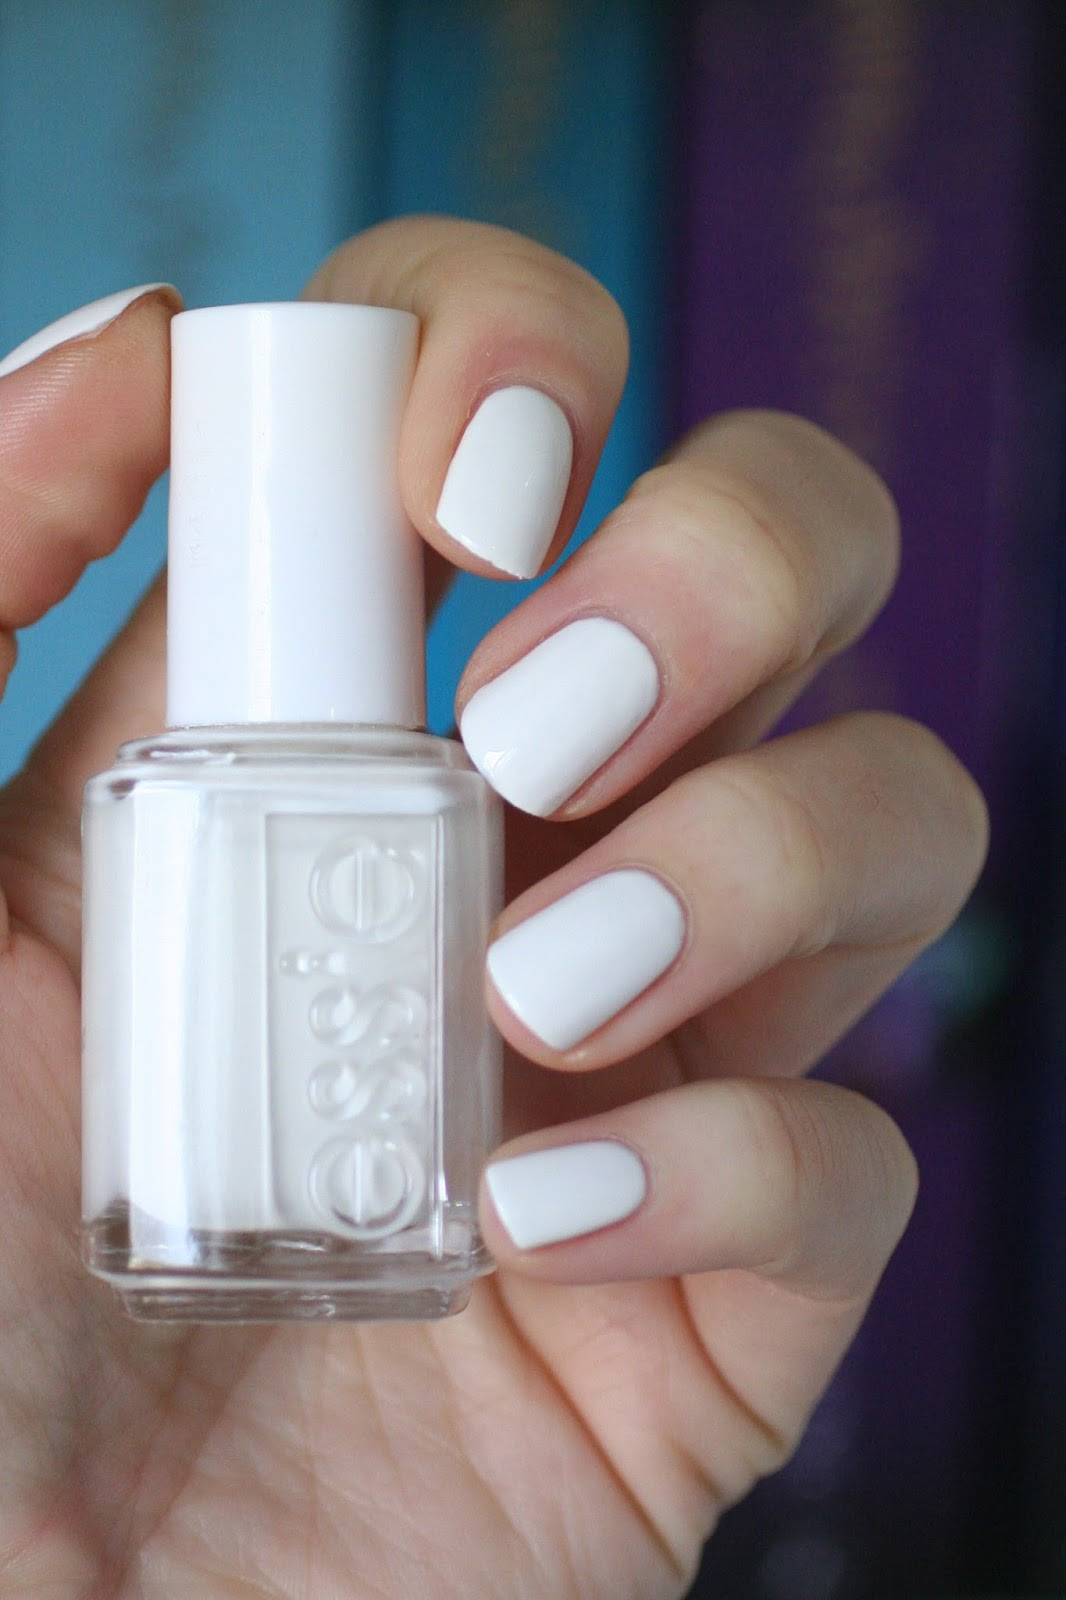 Best Essie Nail Colors
 The Best Selling Essie Polishes of All Time with Swatches